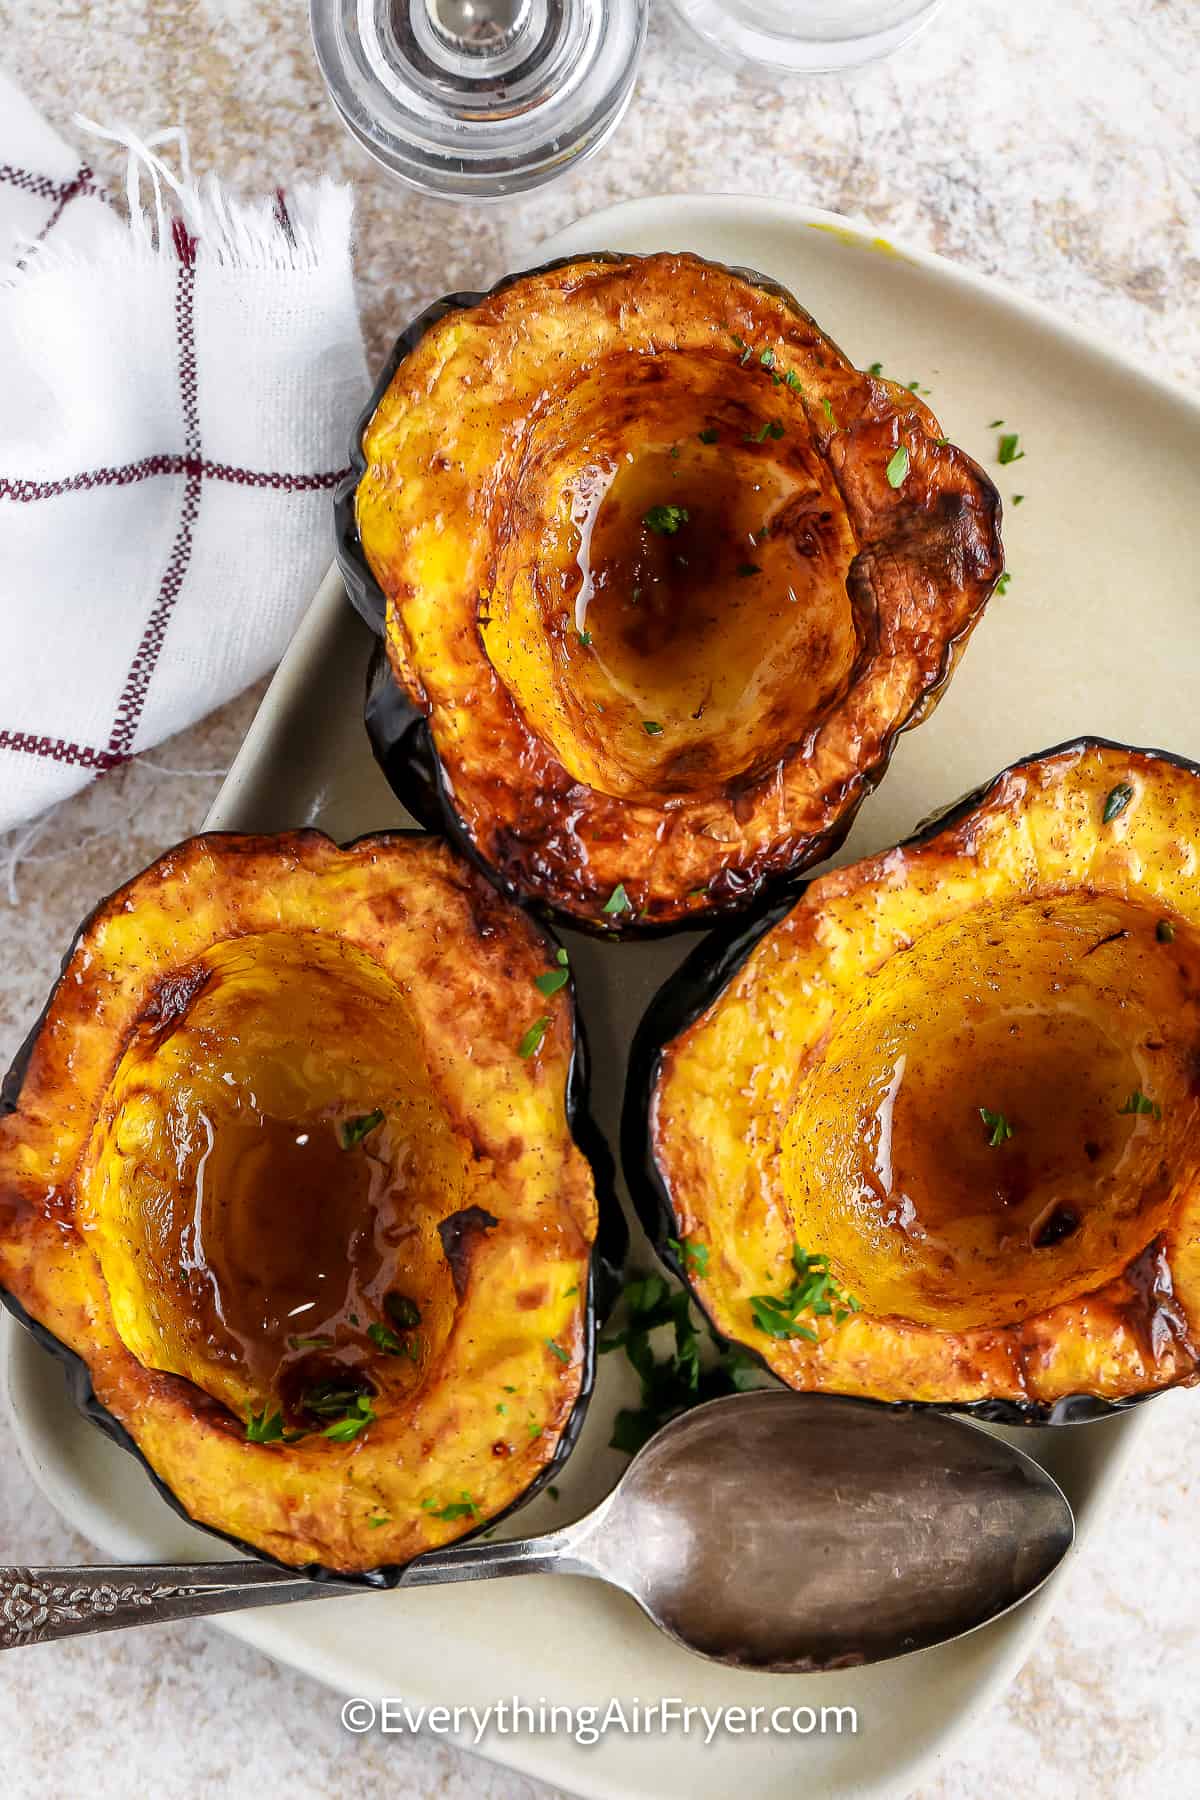 The halves of Air Fryer Acorn Squash on a serving plate.